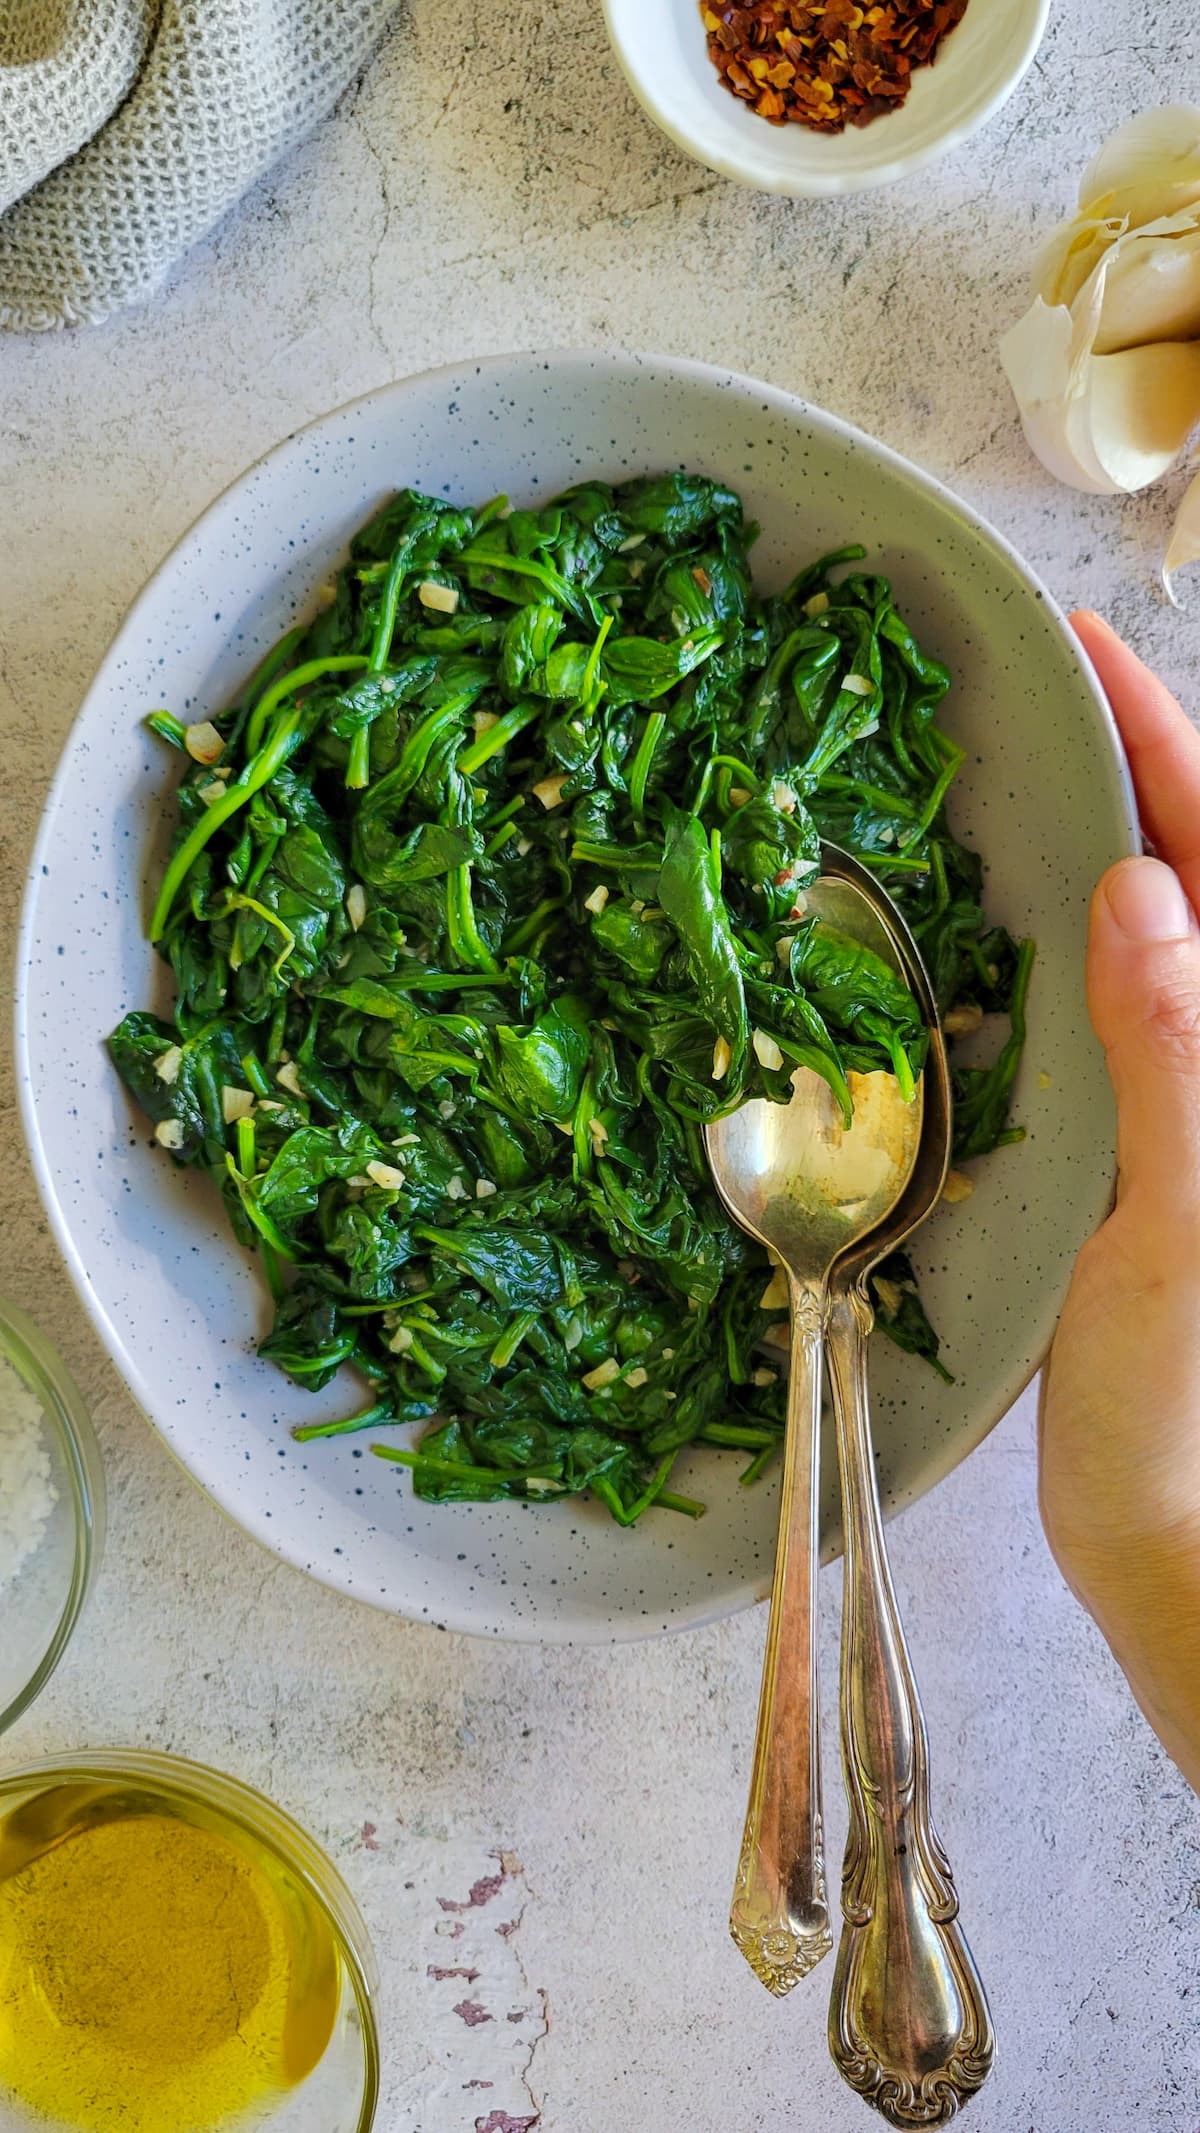 hand holding a bowl with cooked spinach and minced garlic, two spoons in the bowl, chili flakes, garlic cloves and olive oil around it